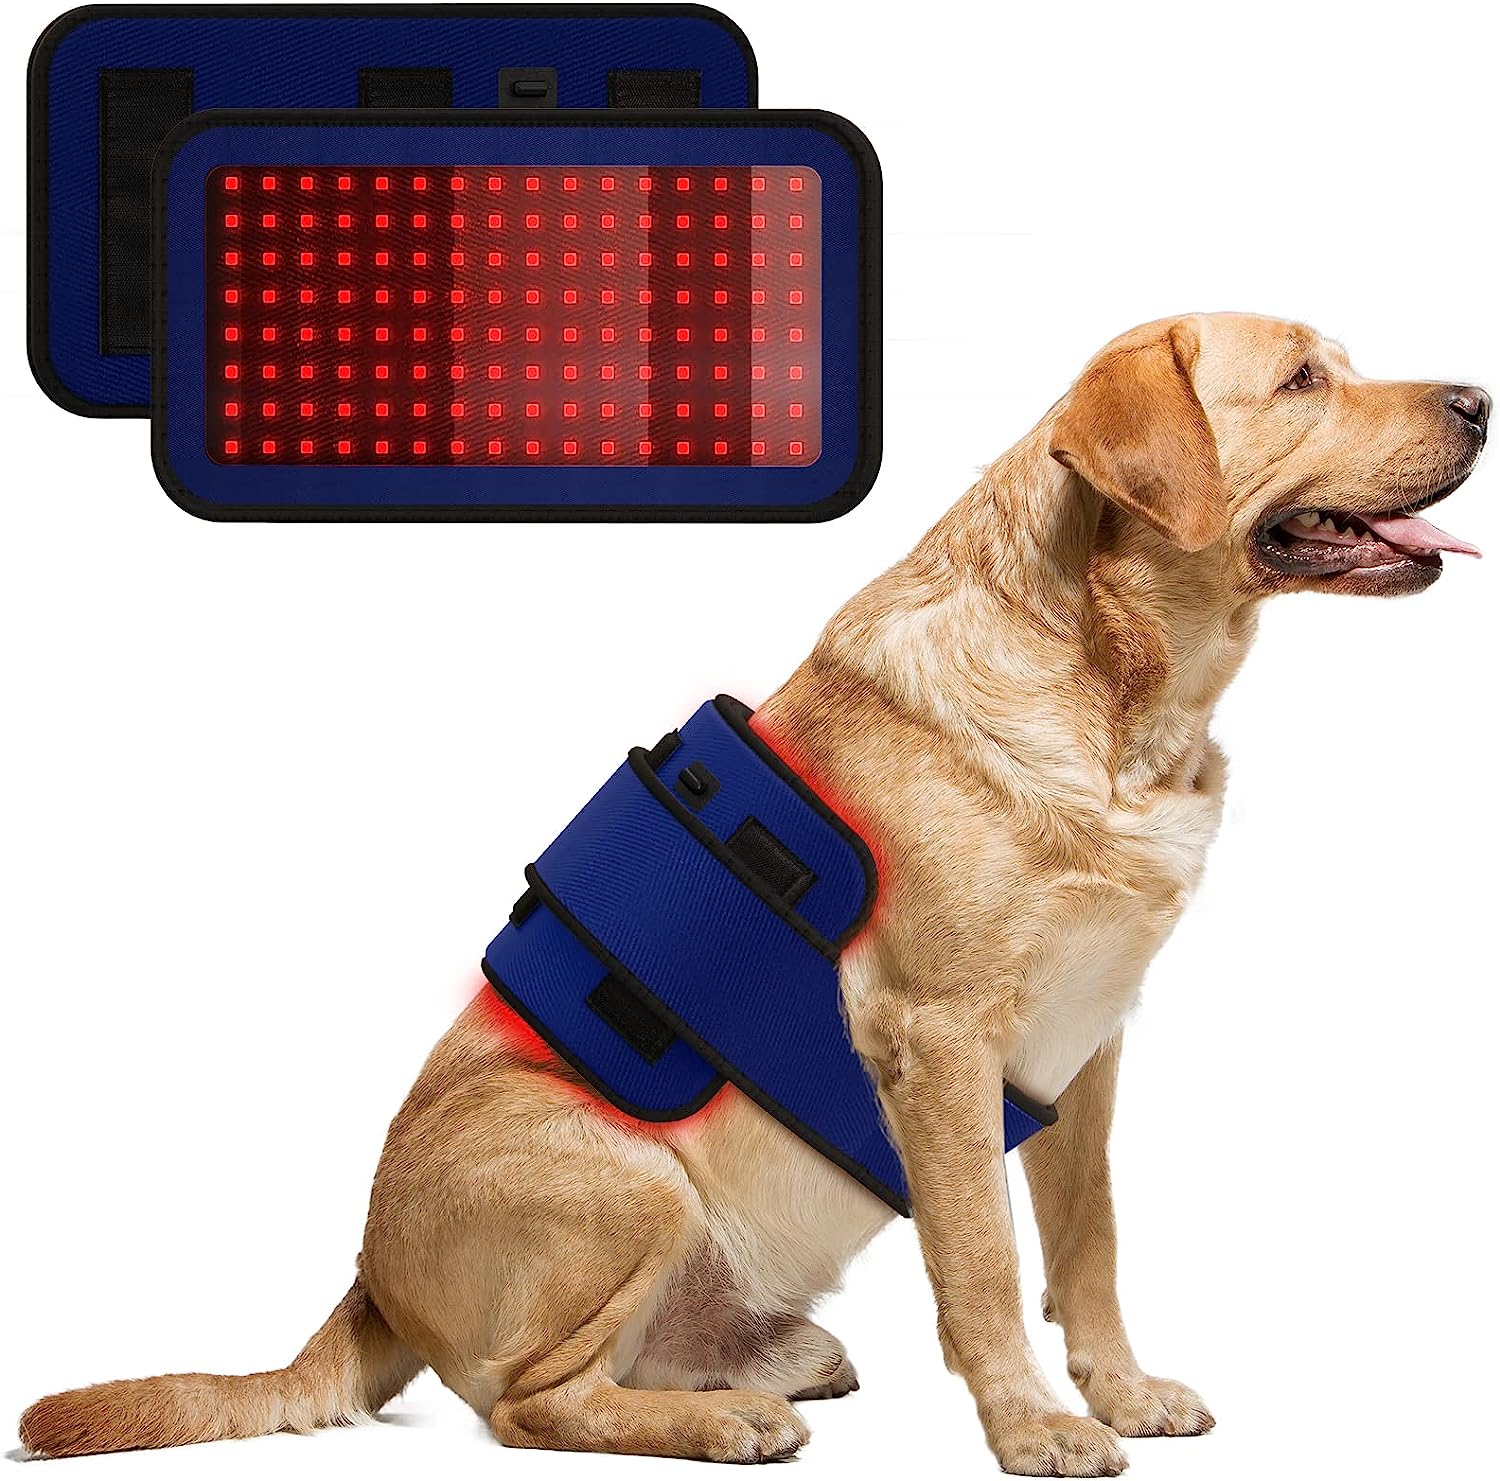 PUPCA Cold Laser Therapy Device for Dogs